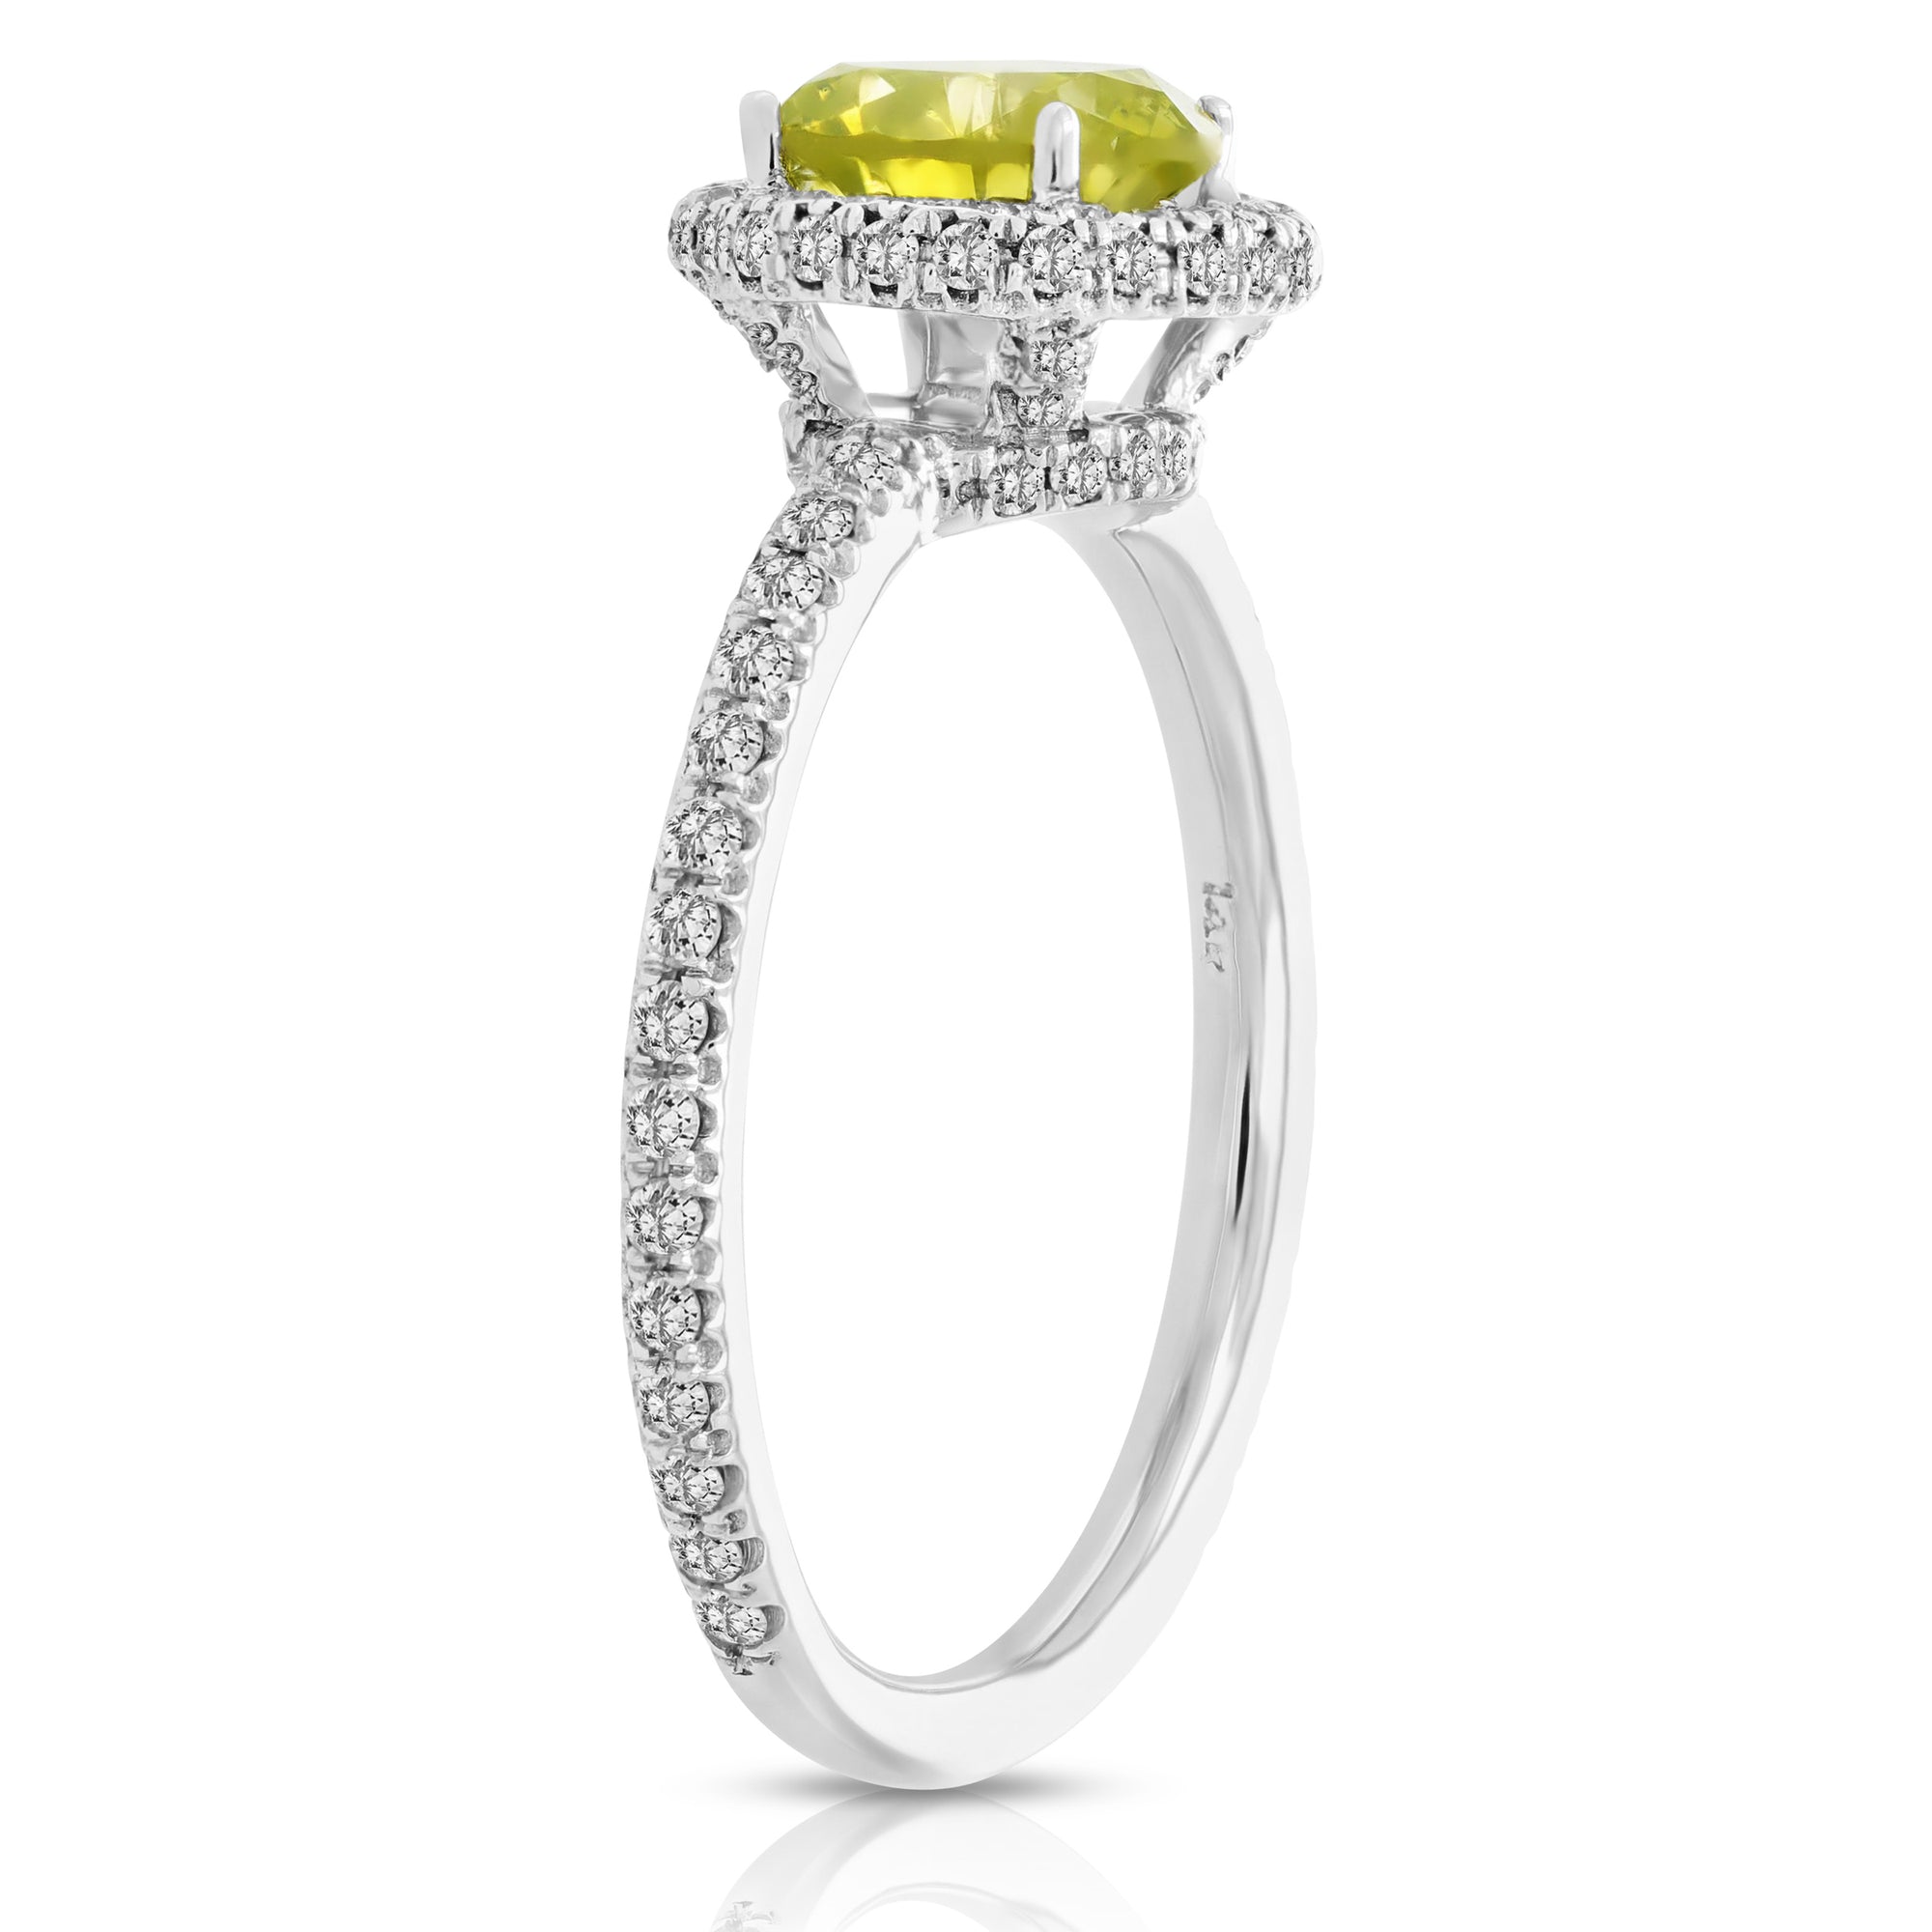 2 cttw Yellow and White Diamond Engagement Ring 14K White Gold Bridal Size 8